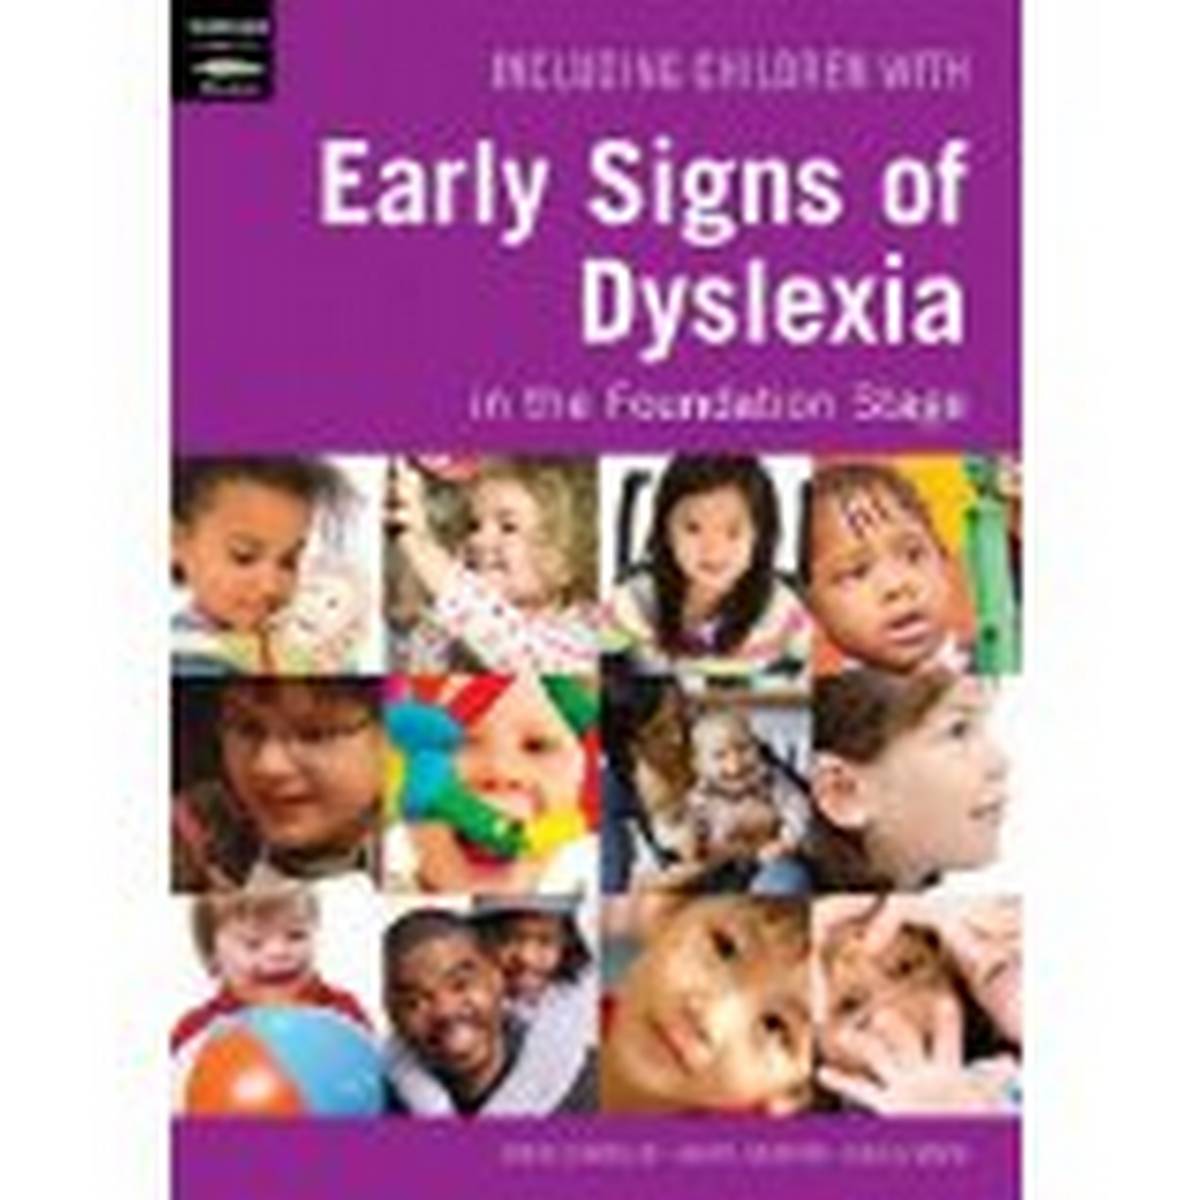 Including Children With Early Signs of Dyslexia